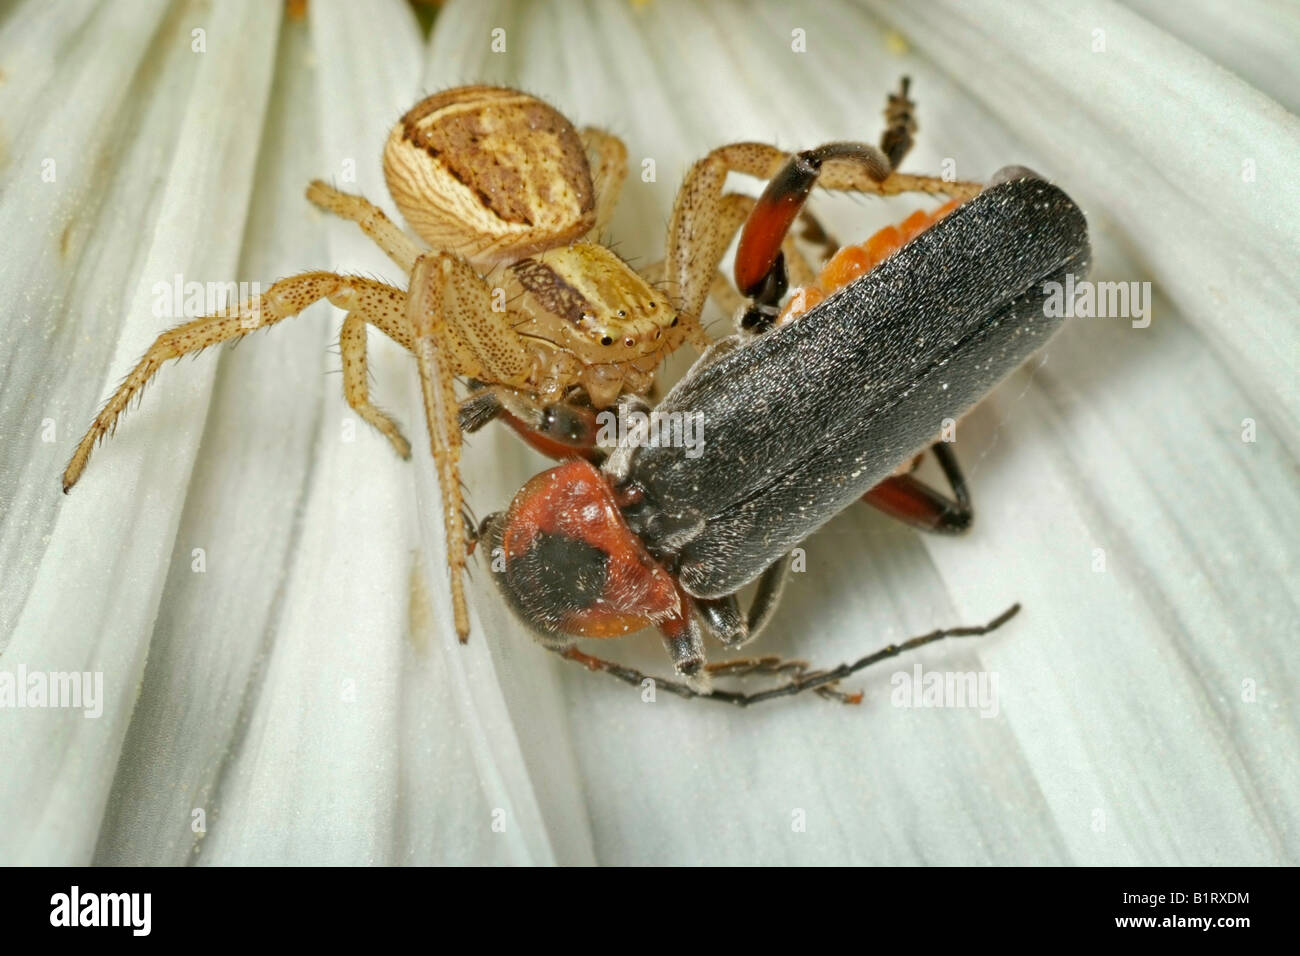 Brown Crab Spider (Xysticus cristatus), Soldier Beetle (Cantharis fusca) as prey Stock Photo